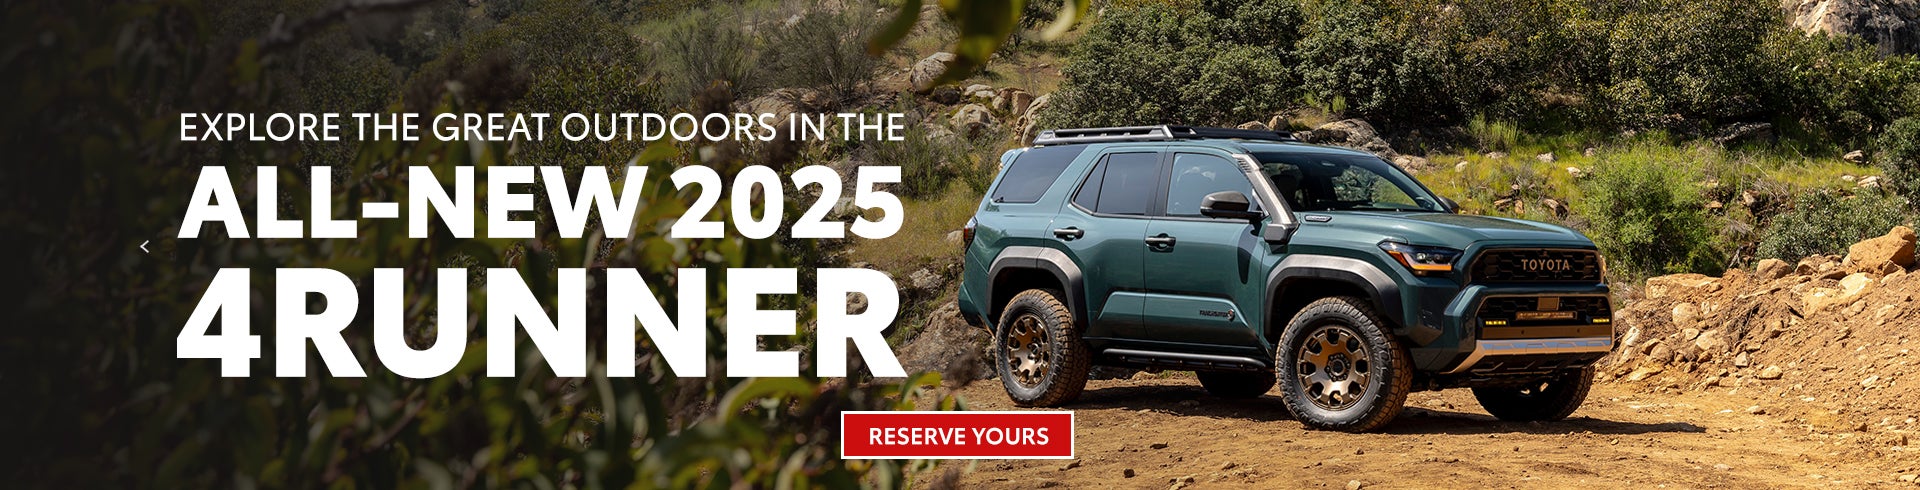 2025 4Runner_Reserve Yours